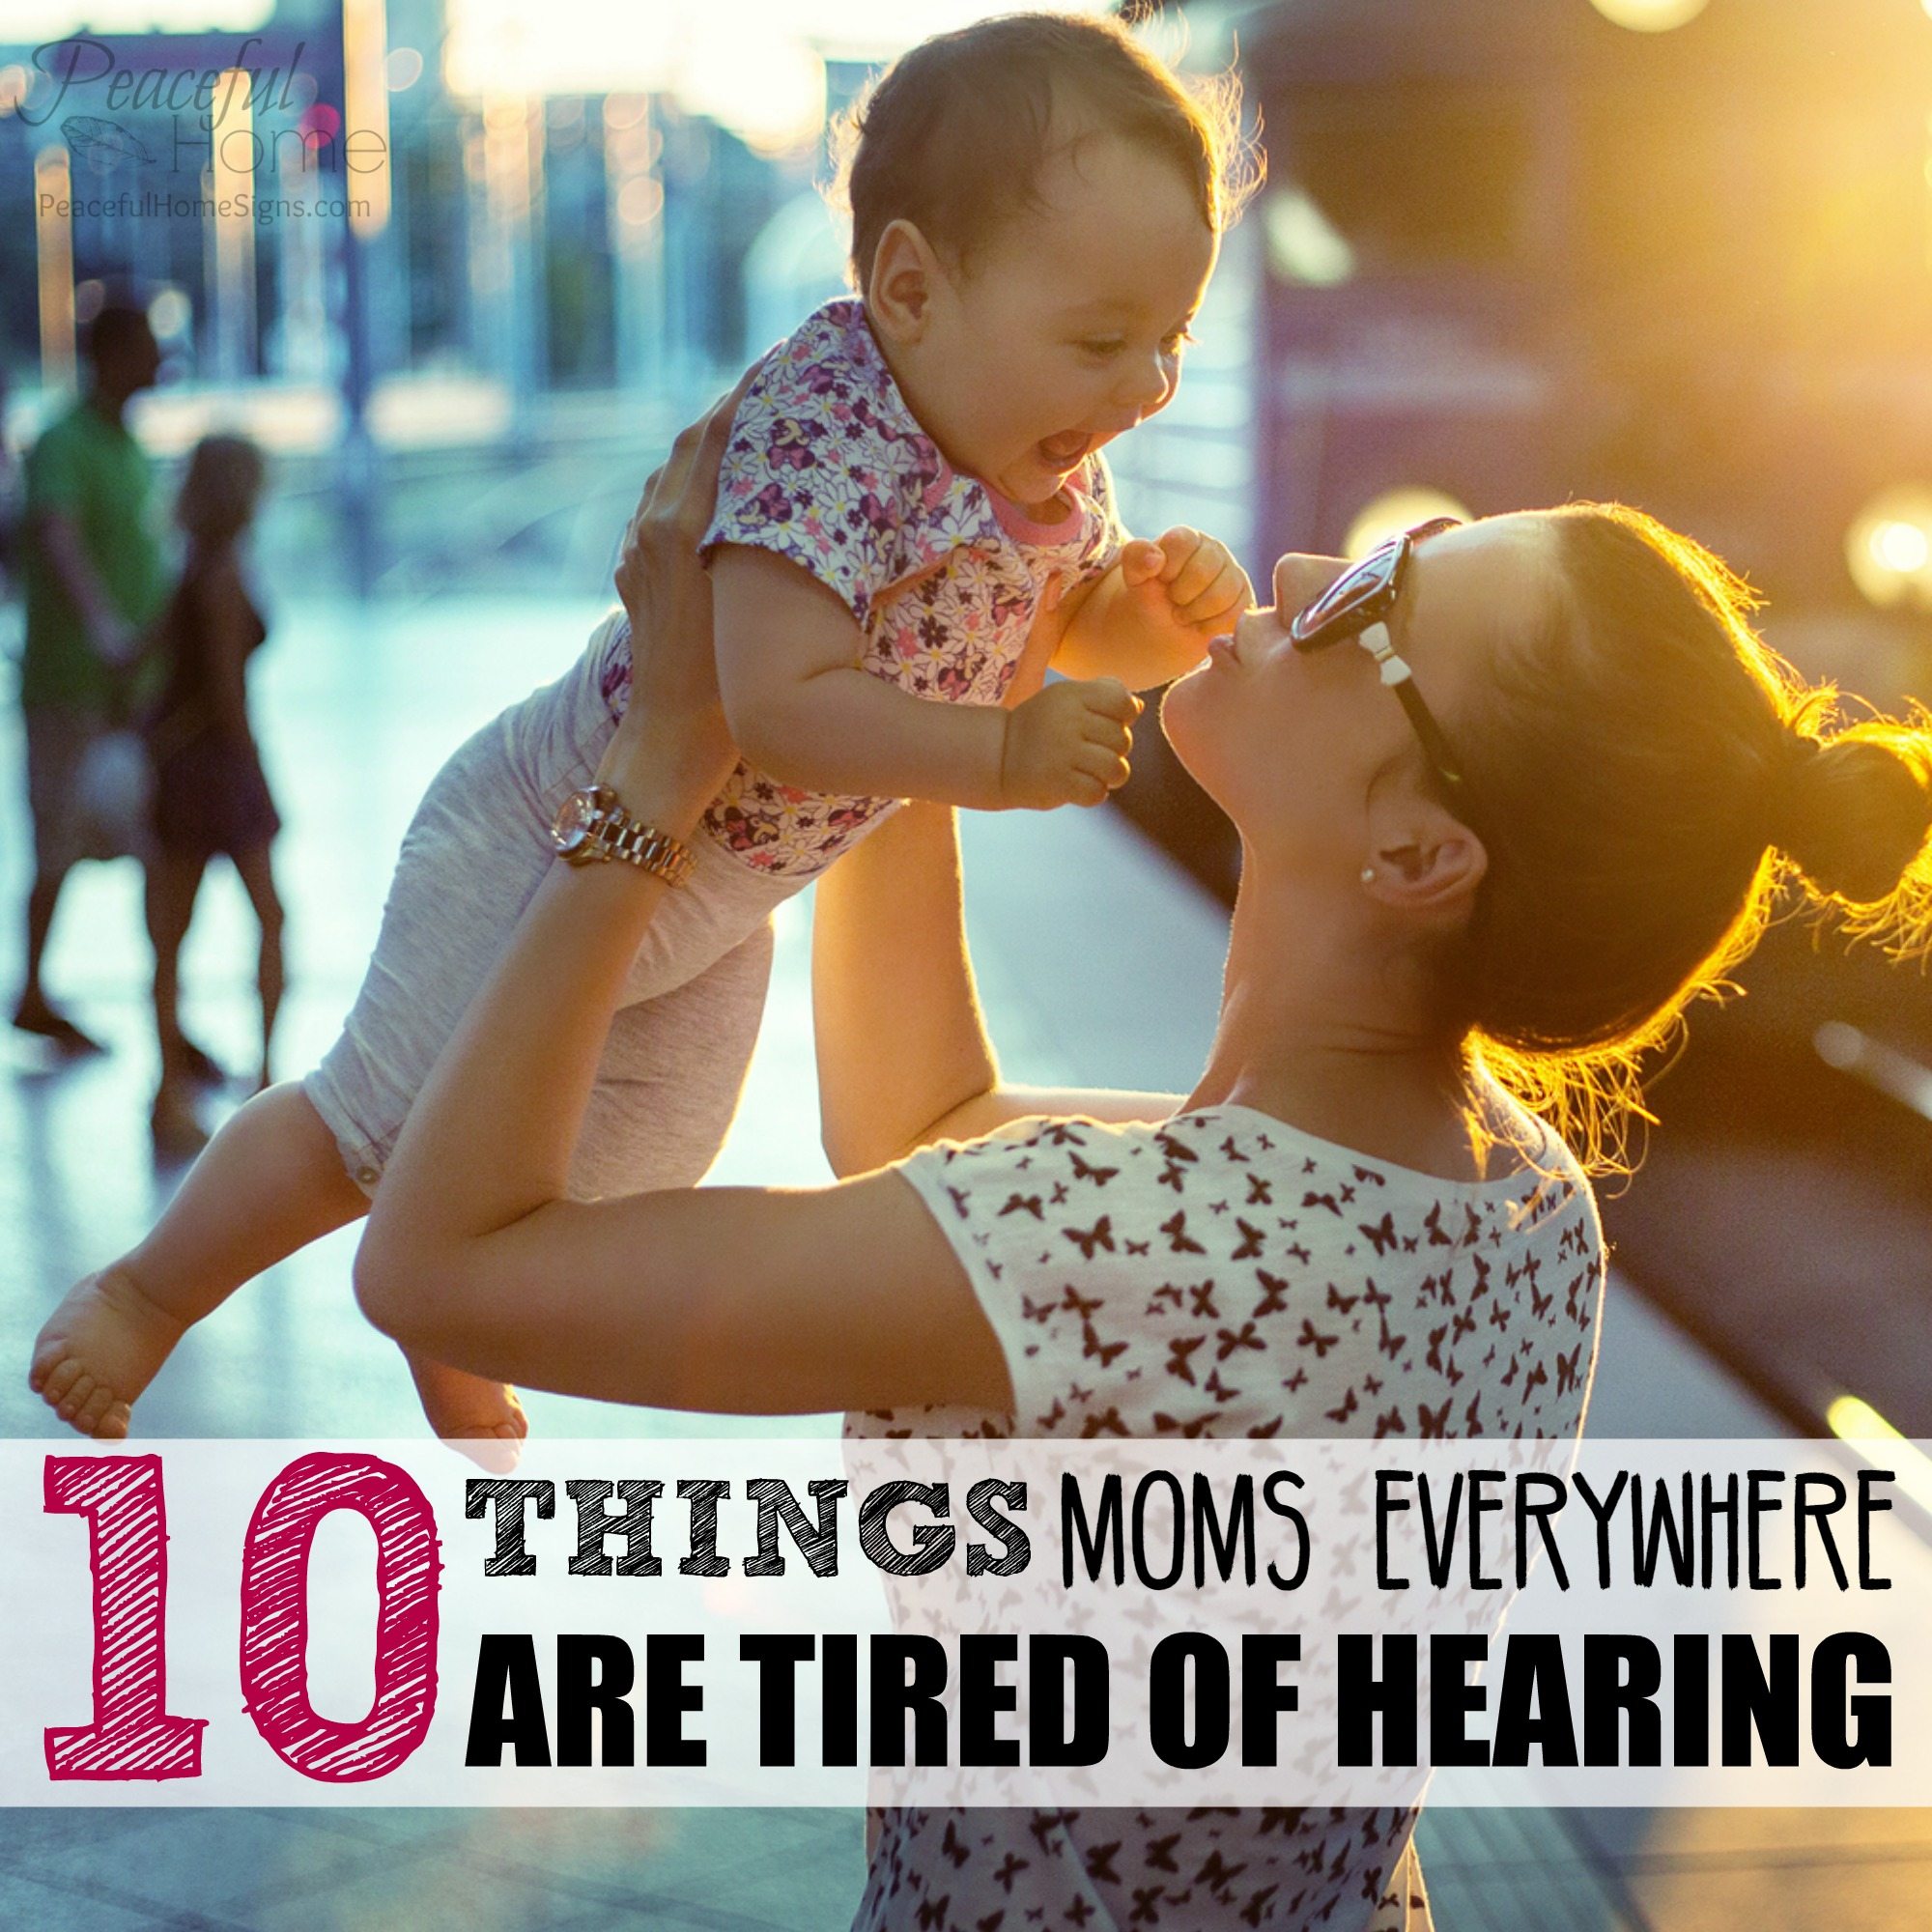 10 Things Moms Everywhere Are Tired of Hearing